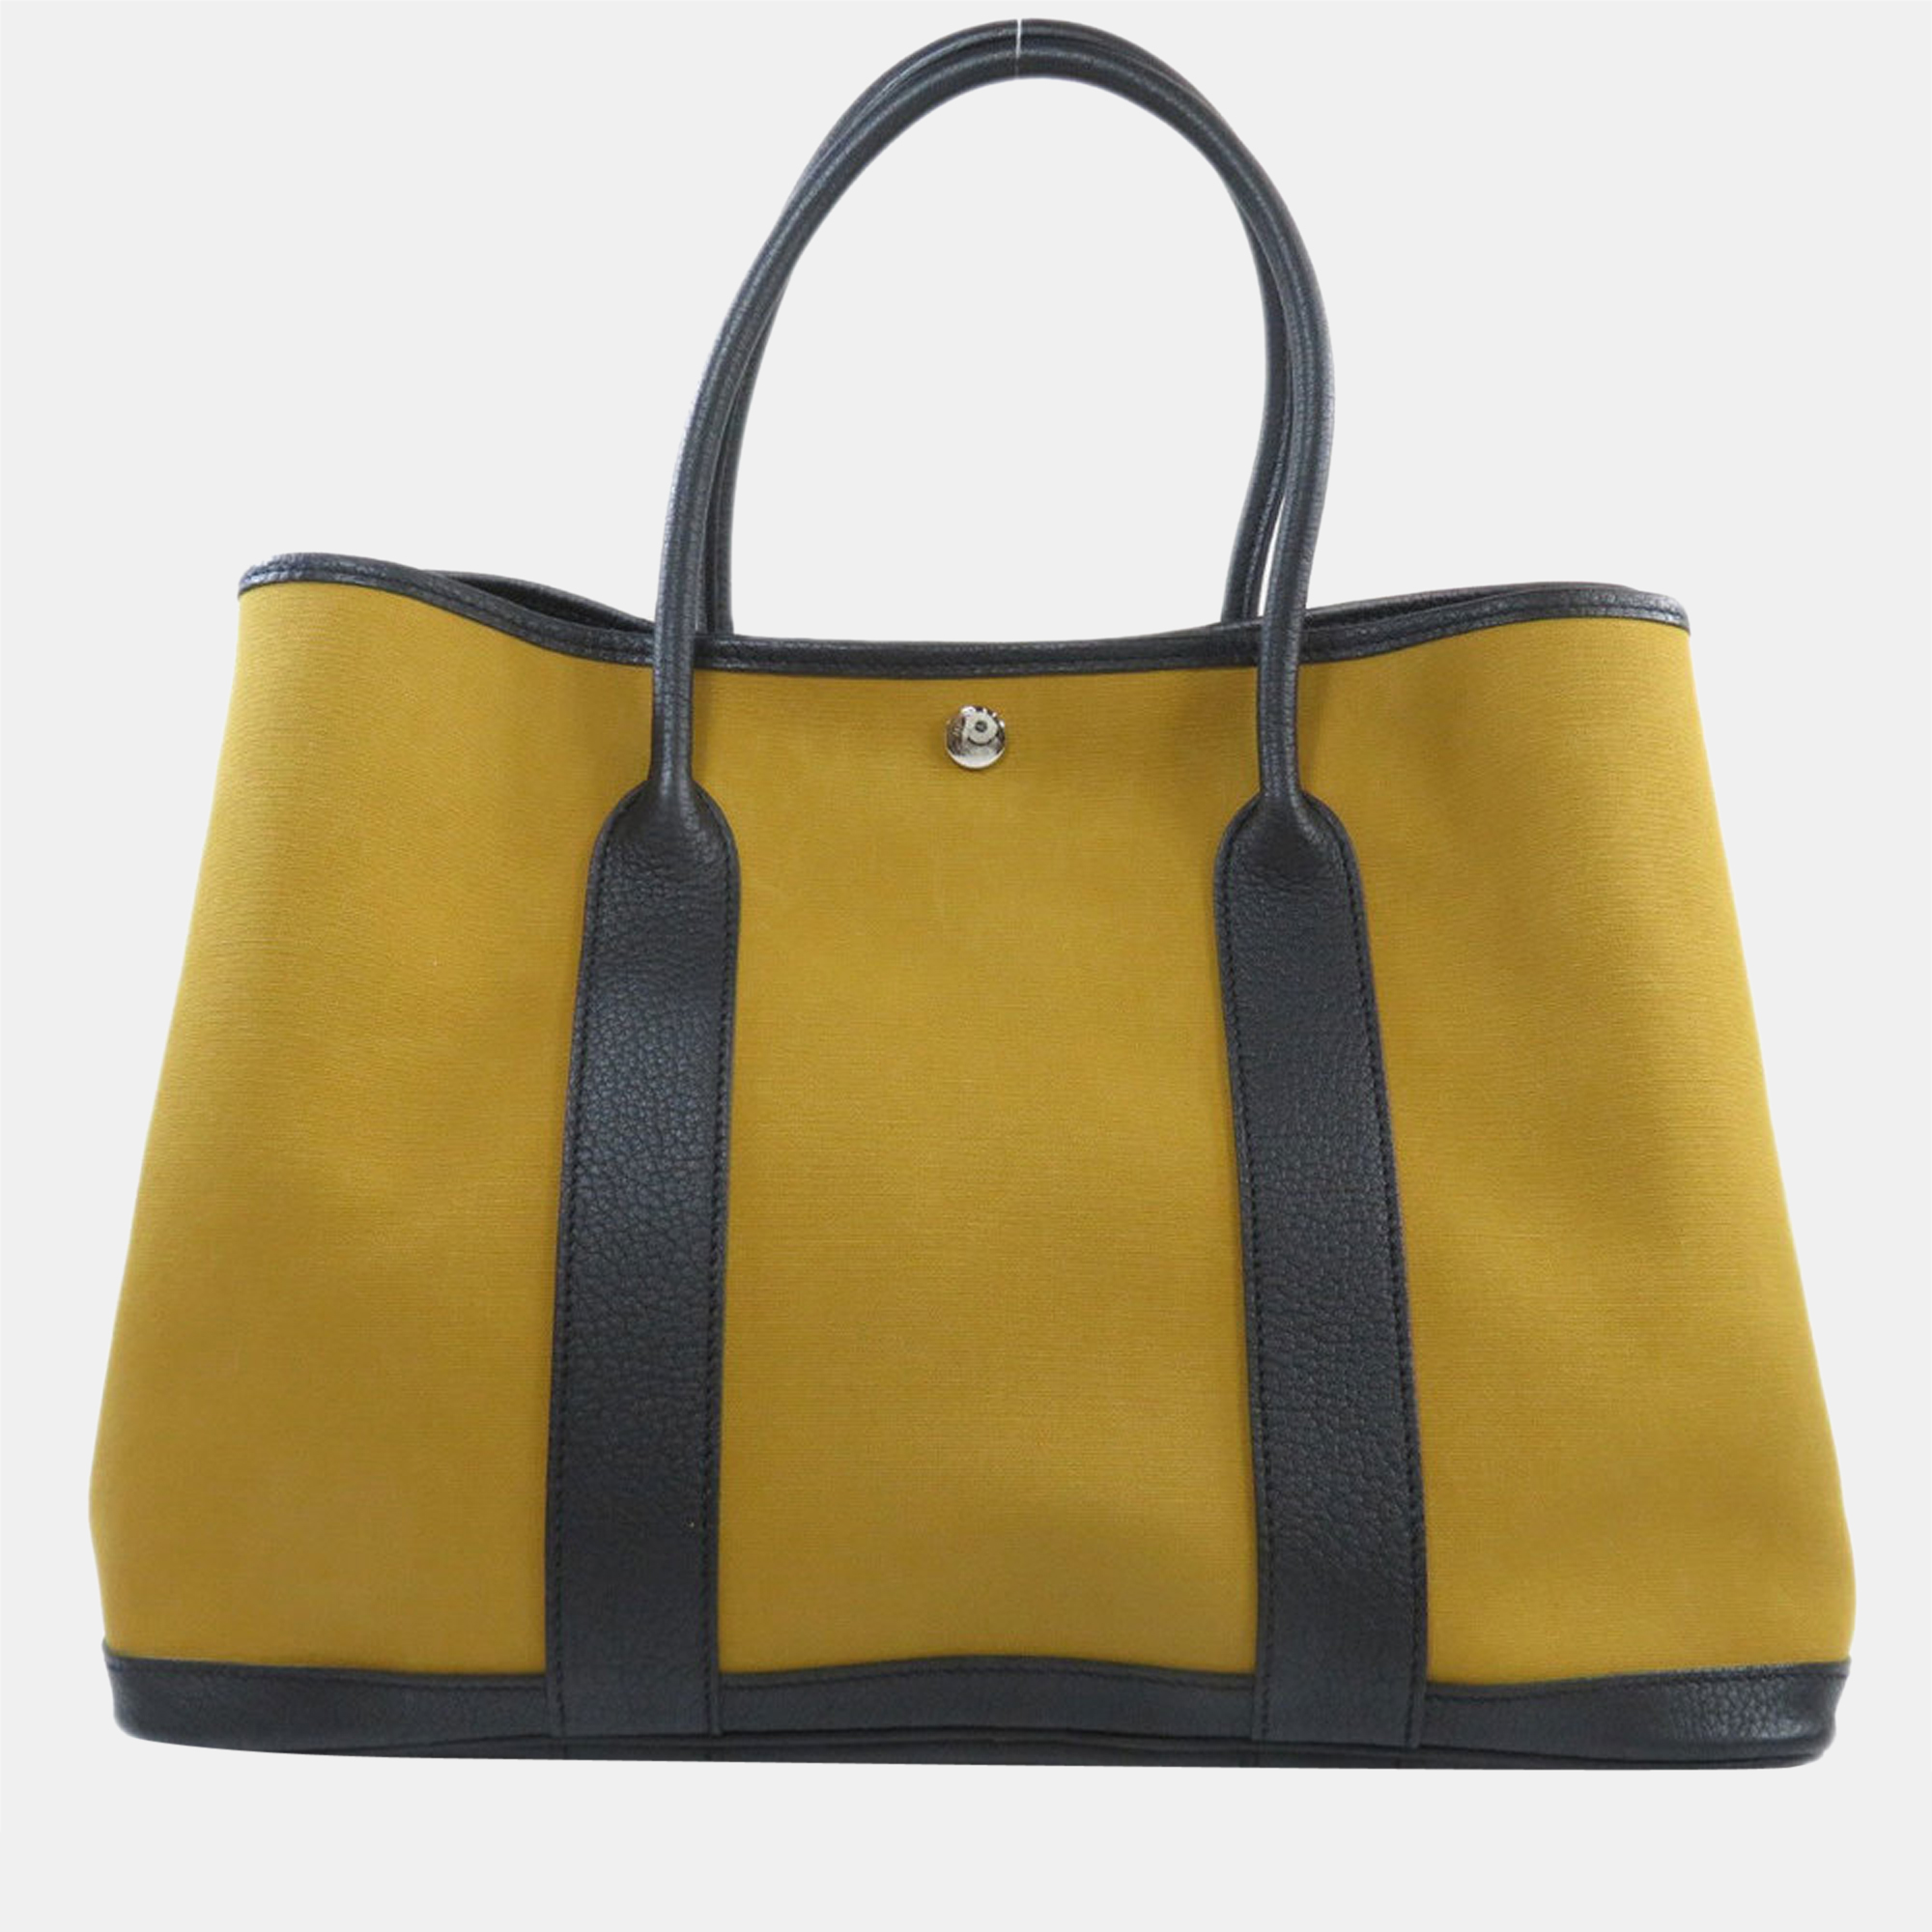 Hermes Black Canvas & Leather GARDEN PARTY PM Tote Bag